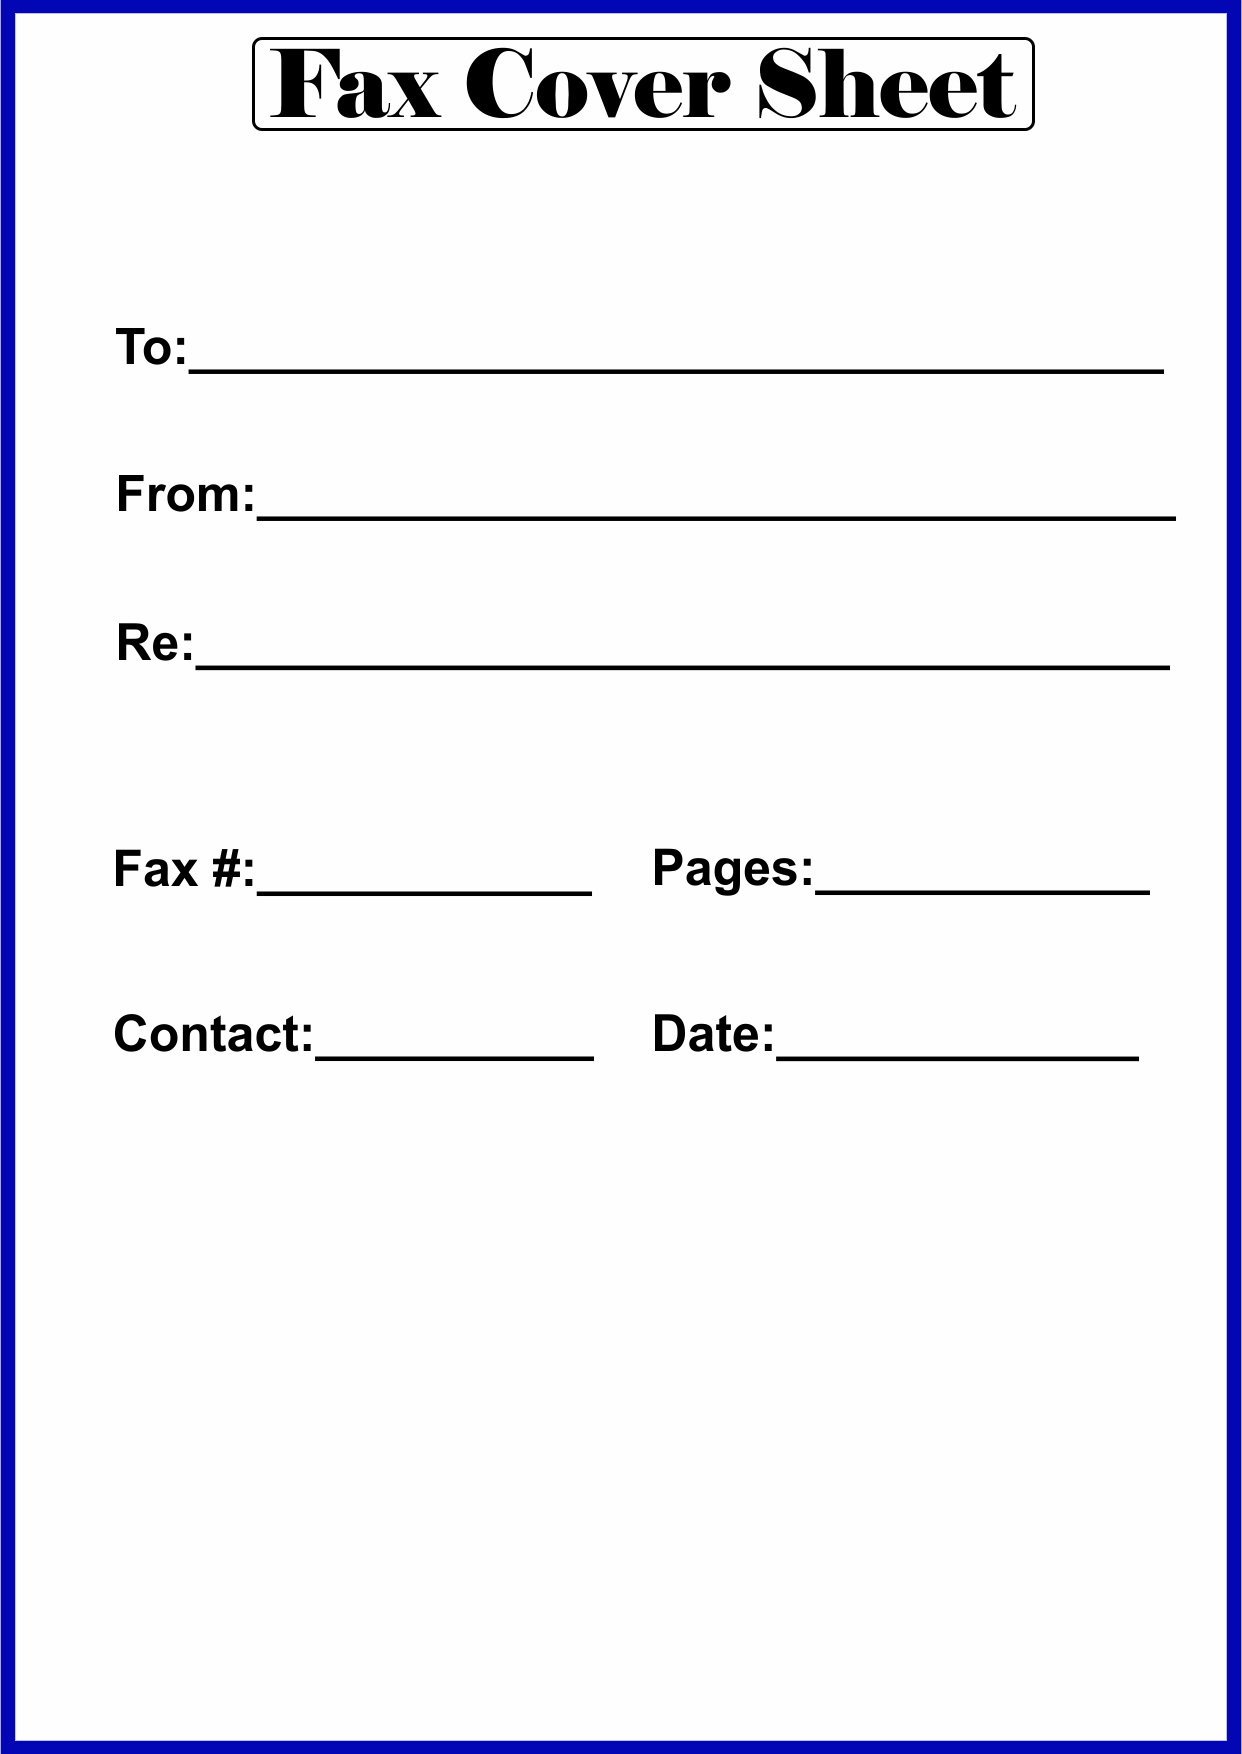 Fax Cover Letter Example from faxcoversheethub.com